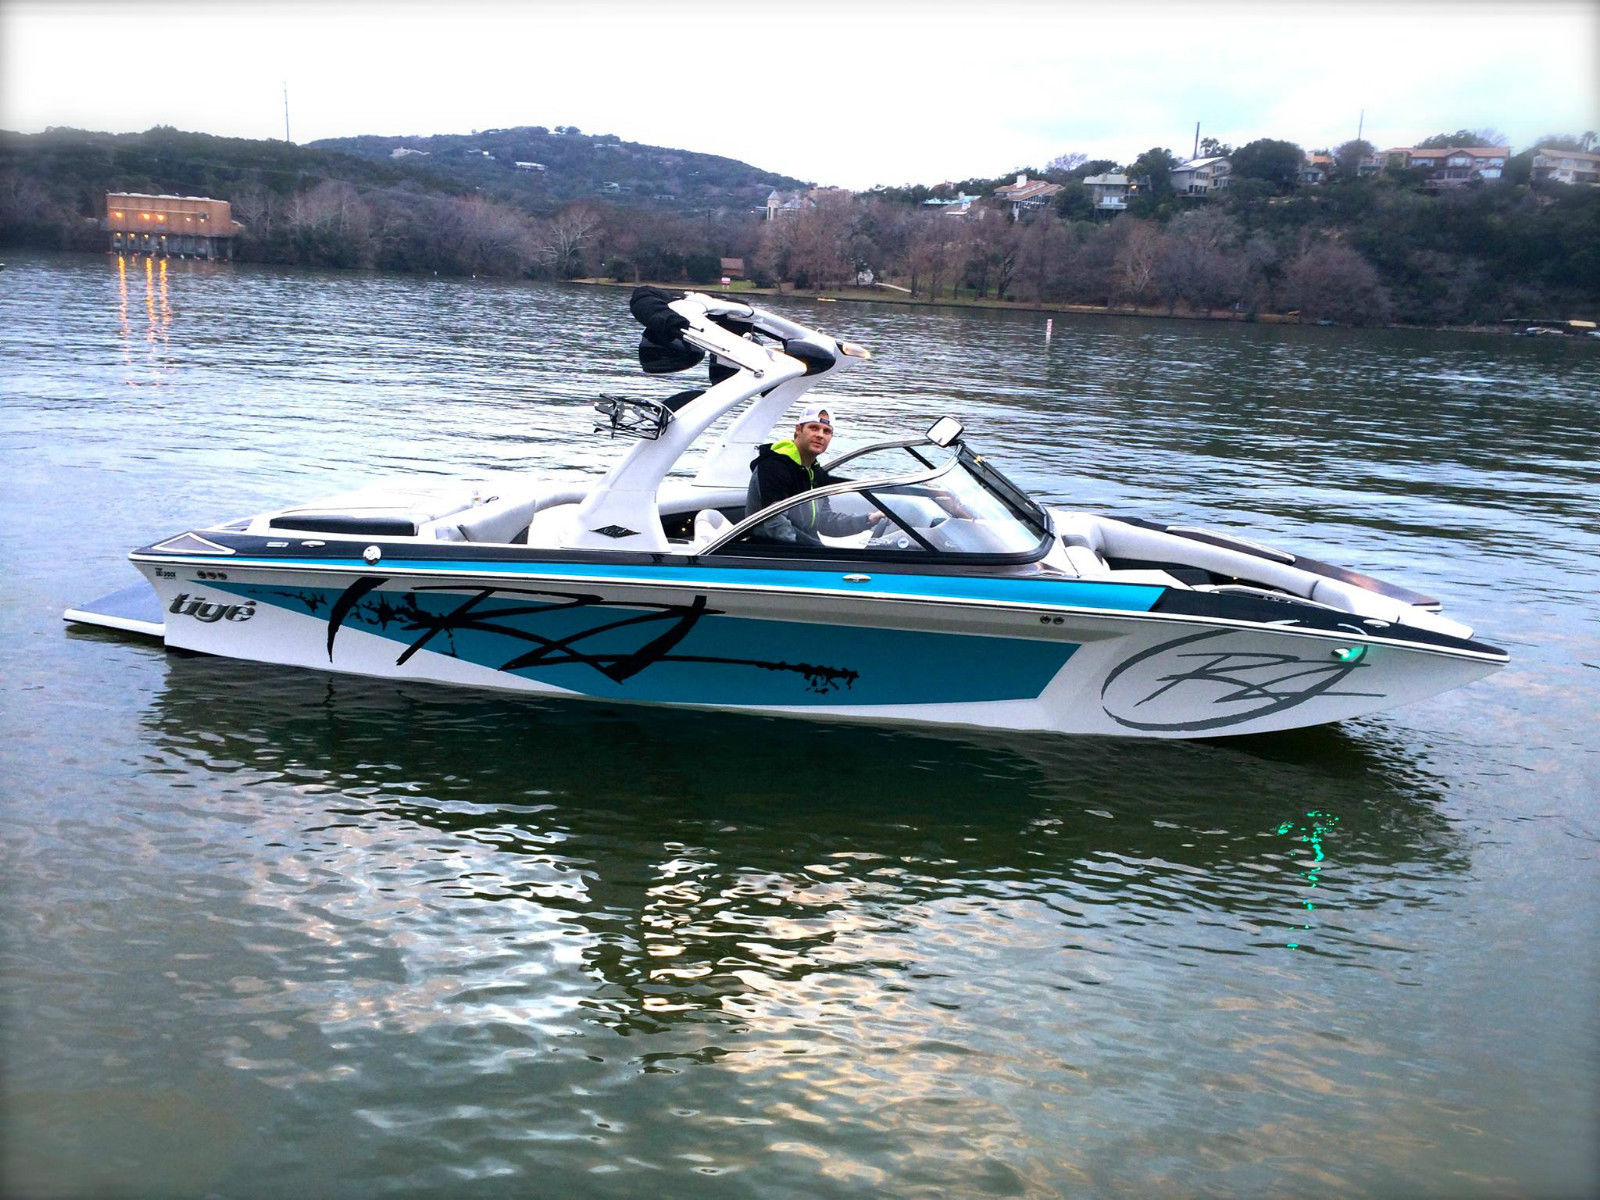 Tige RZ2 2012 for sale for $50,000 - Boats-from-USA.com